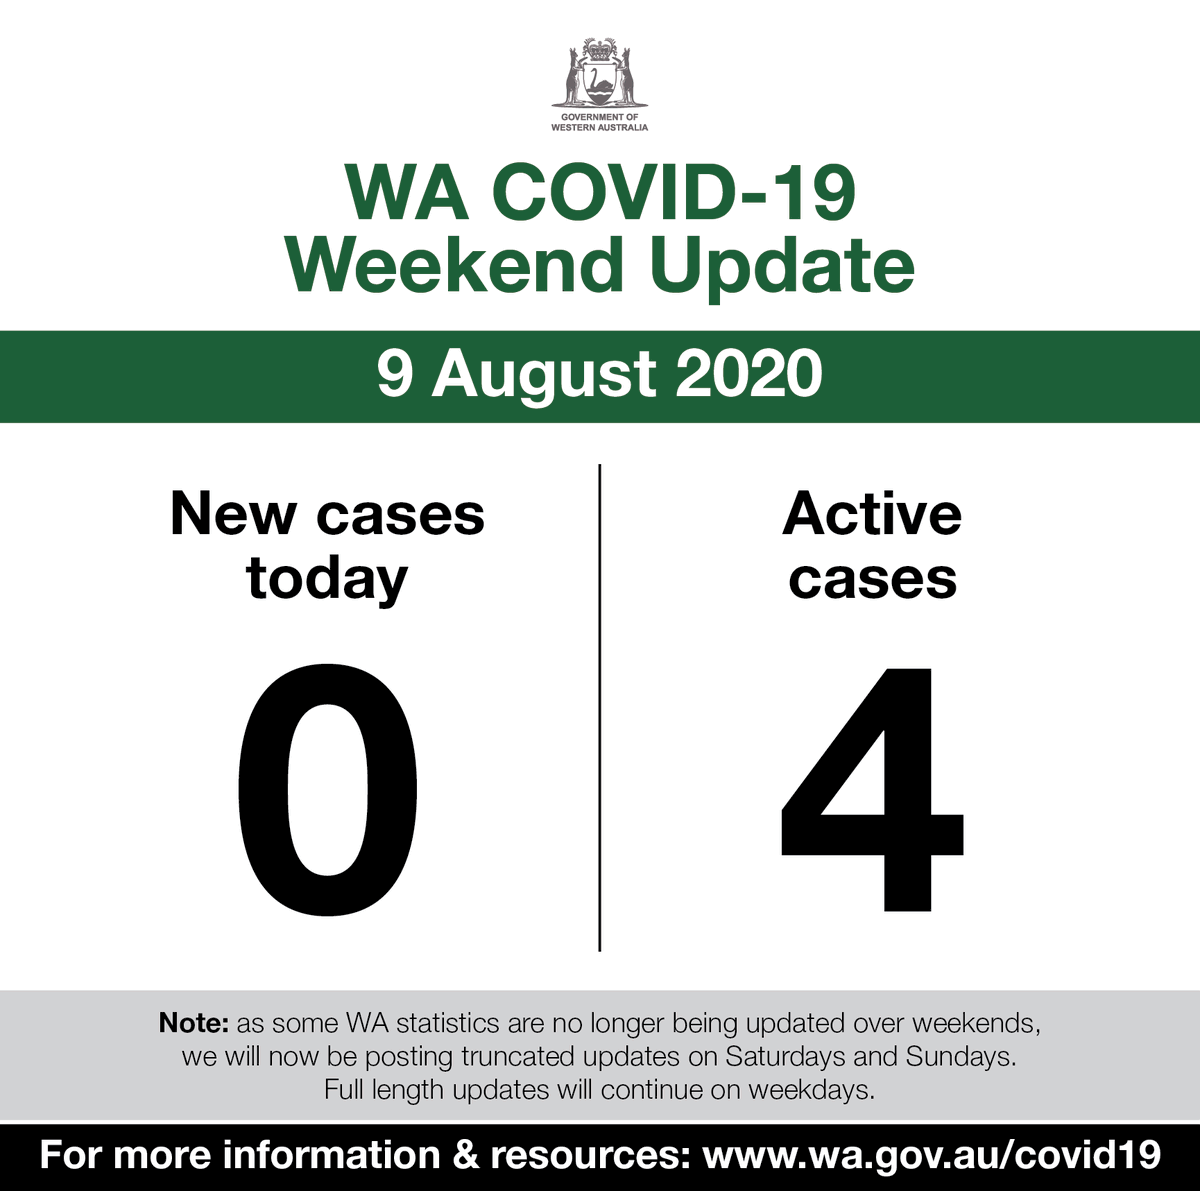 Mark Mcgowan This Is Our Wa Covid 19 Weekend Update For Sunday 9 August For Official Information Regarding Covid 19 In Western Australia Please Visit T Co Gs2jeqypzp T Co Uk2qnjteyx T Co 0k2tfb7srv